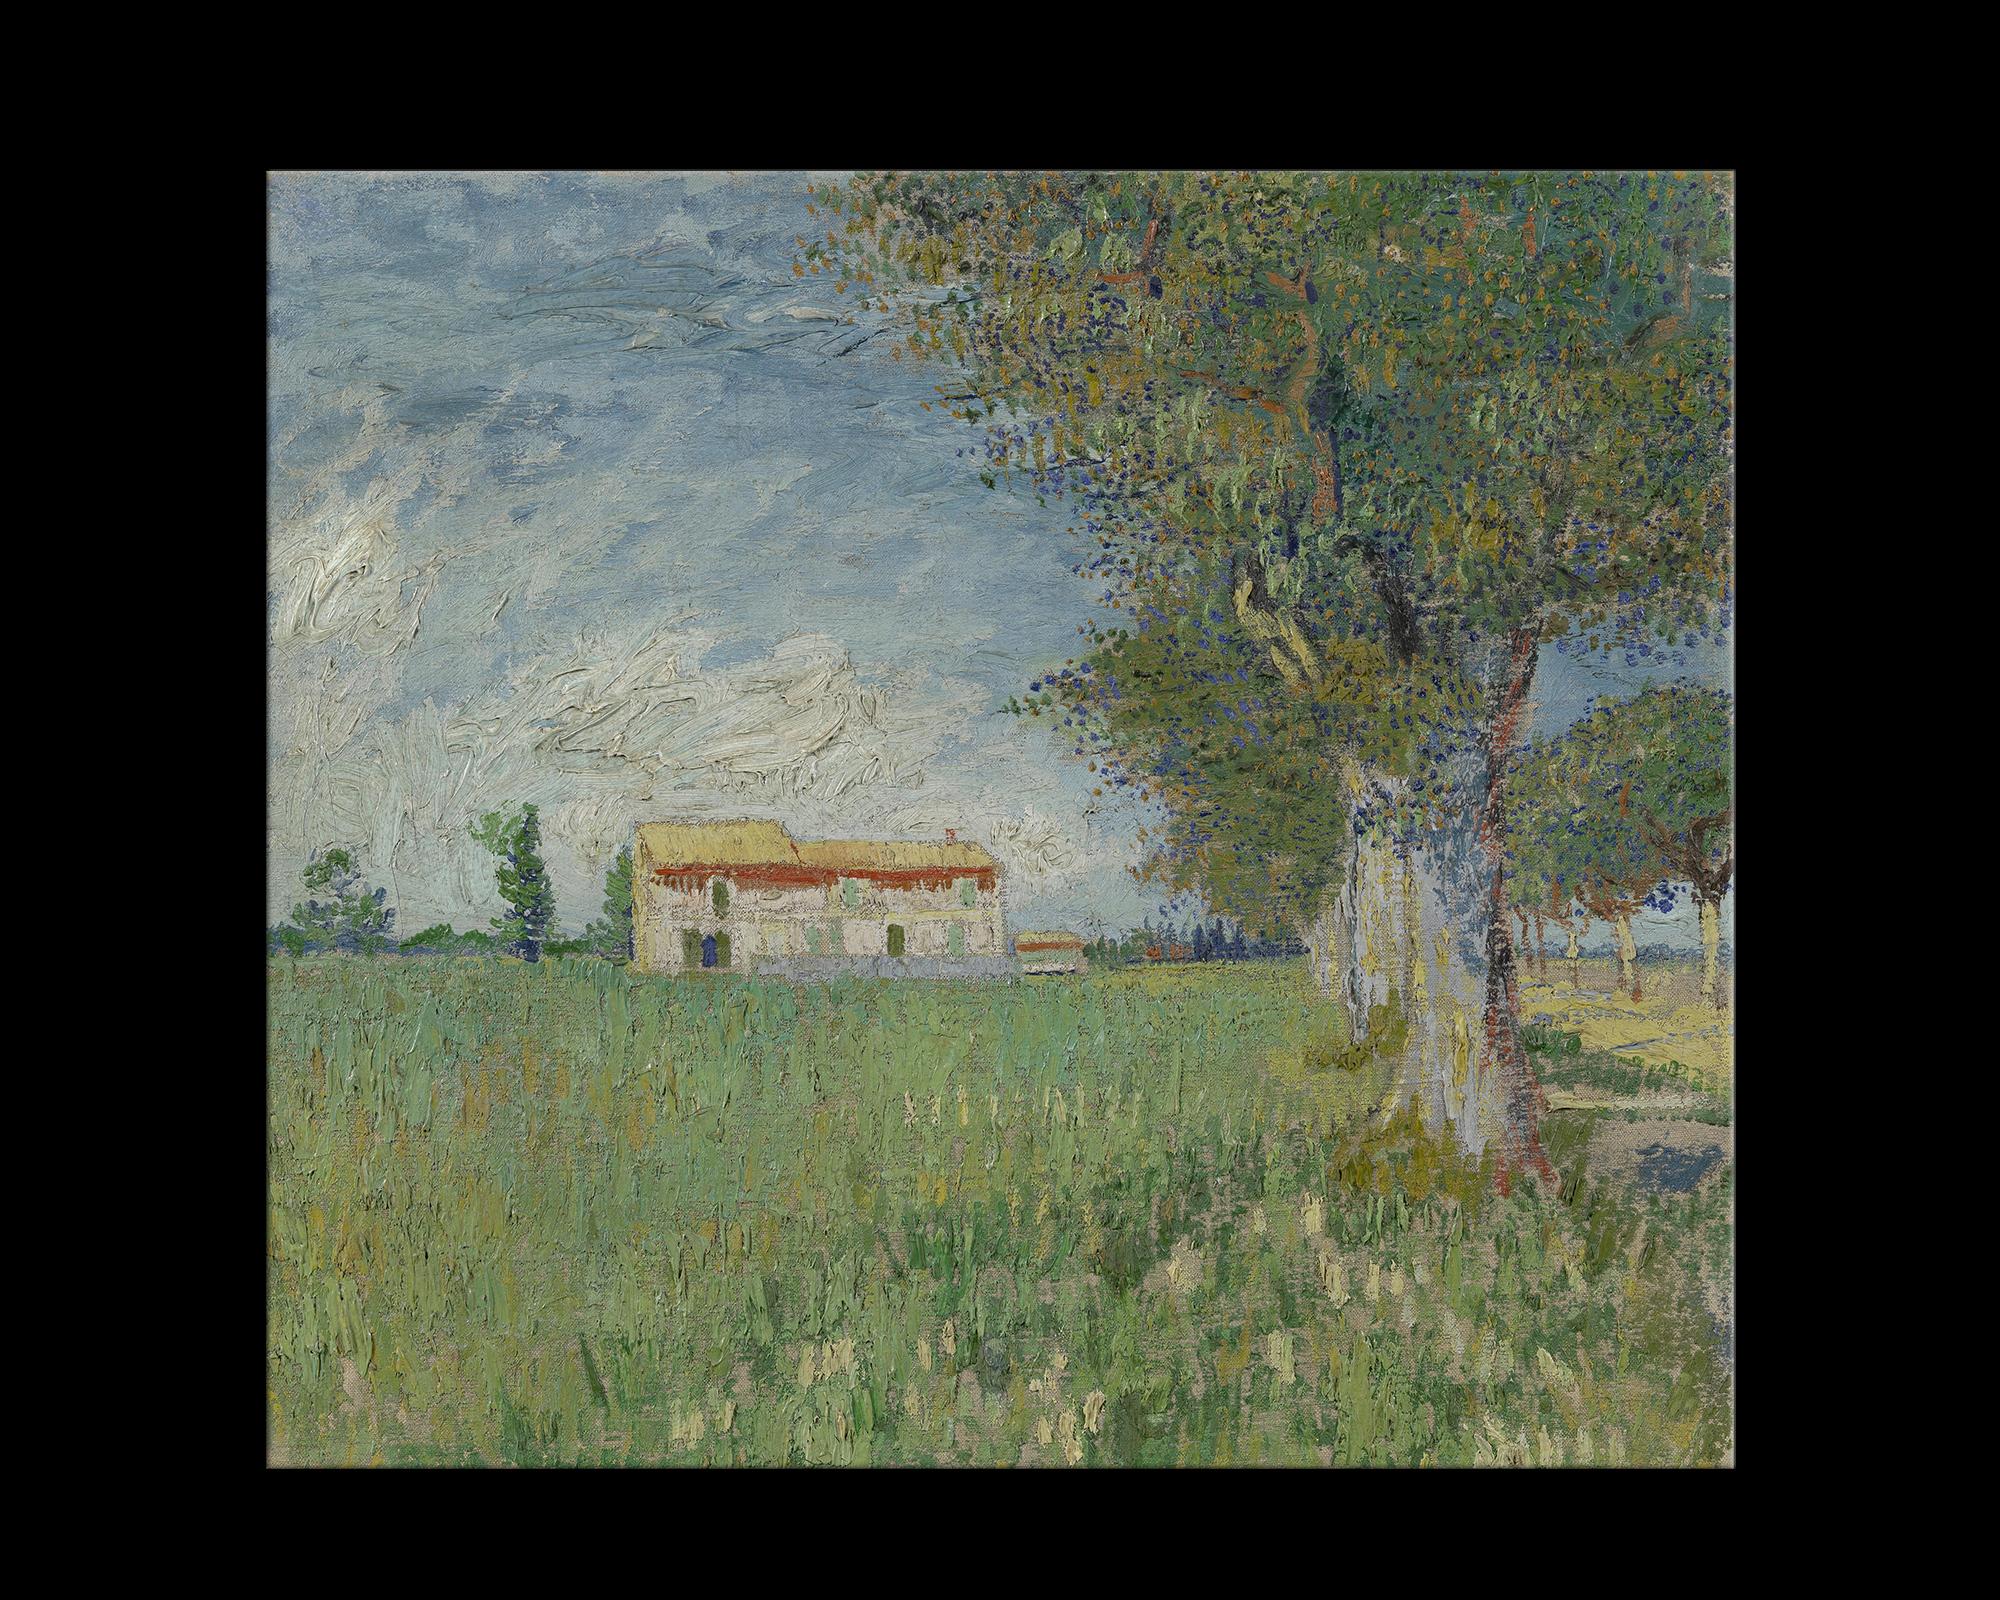 This large impressionist Masterpiece is a faithful yet nuanced reproduction of a 